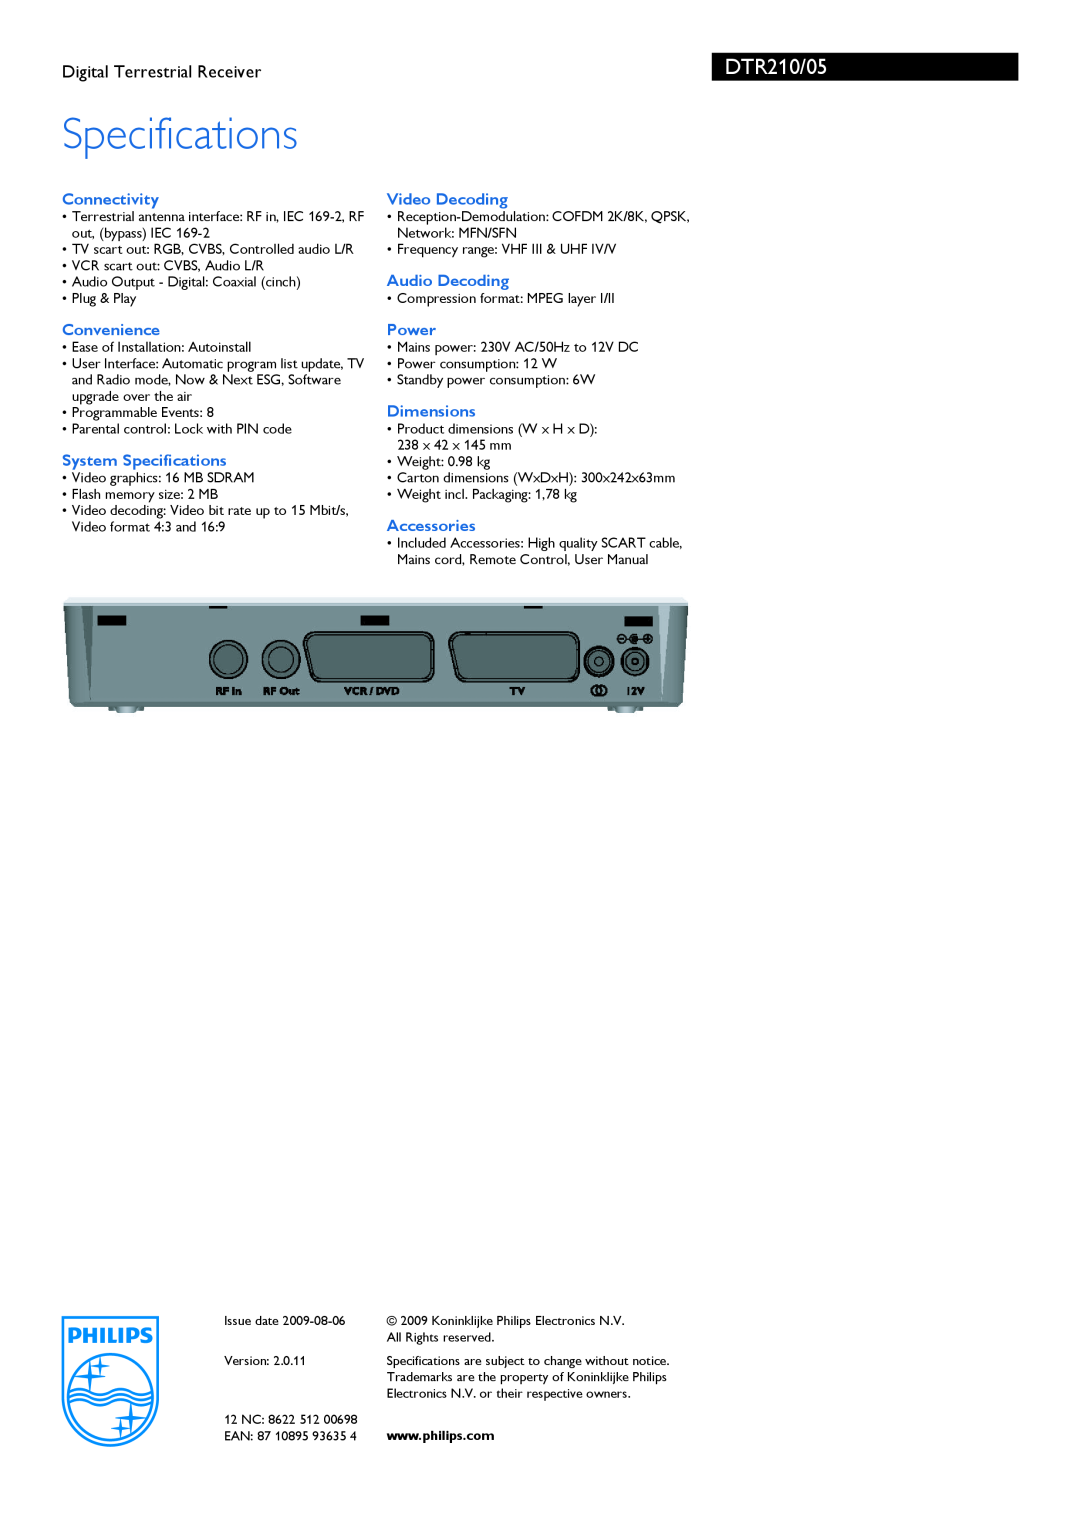 Philips DTR210 Connectivity, Convenience, System Specifications, Video Decoding, Audio Decoding, Power, Dimensions 